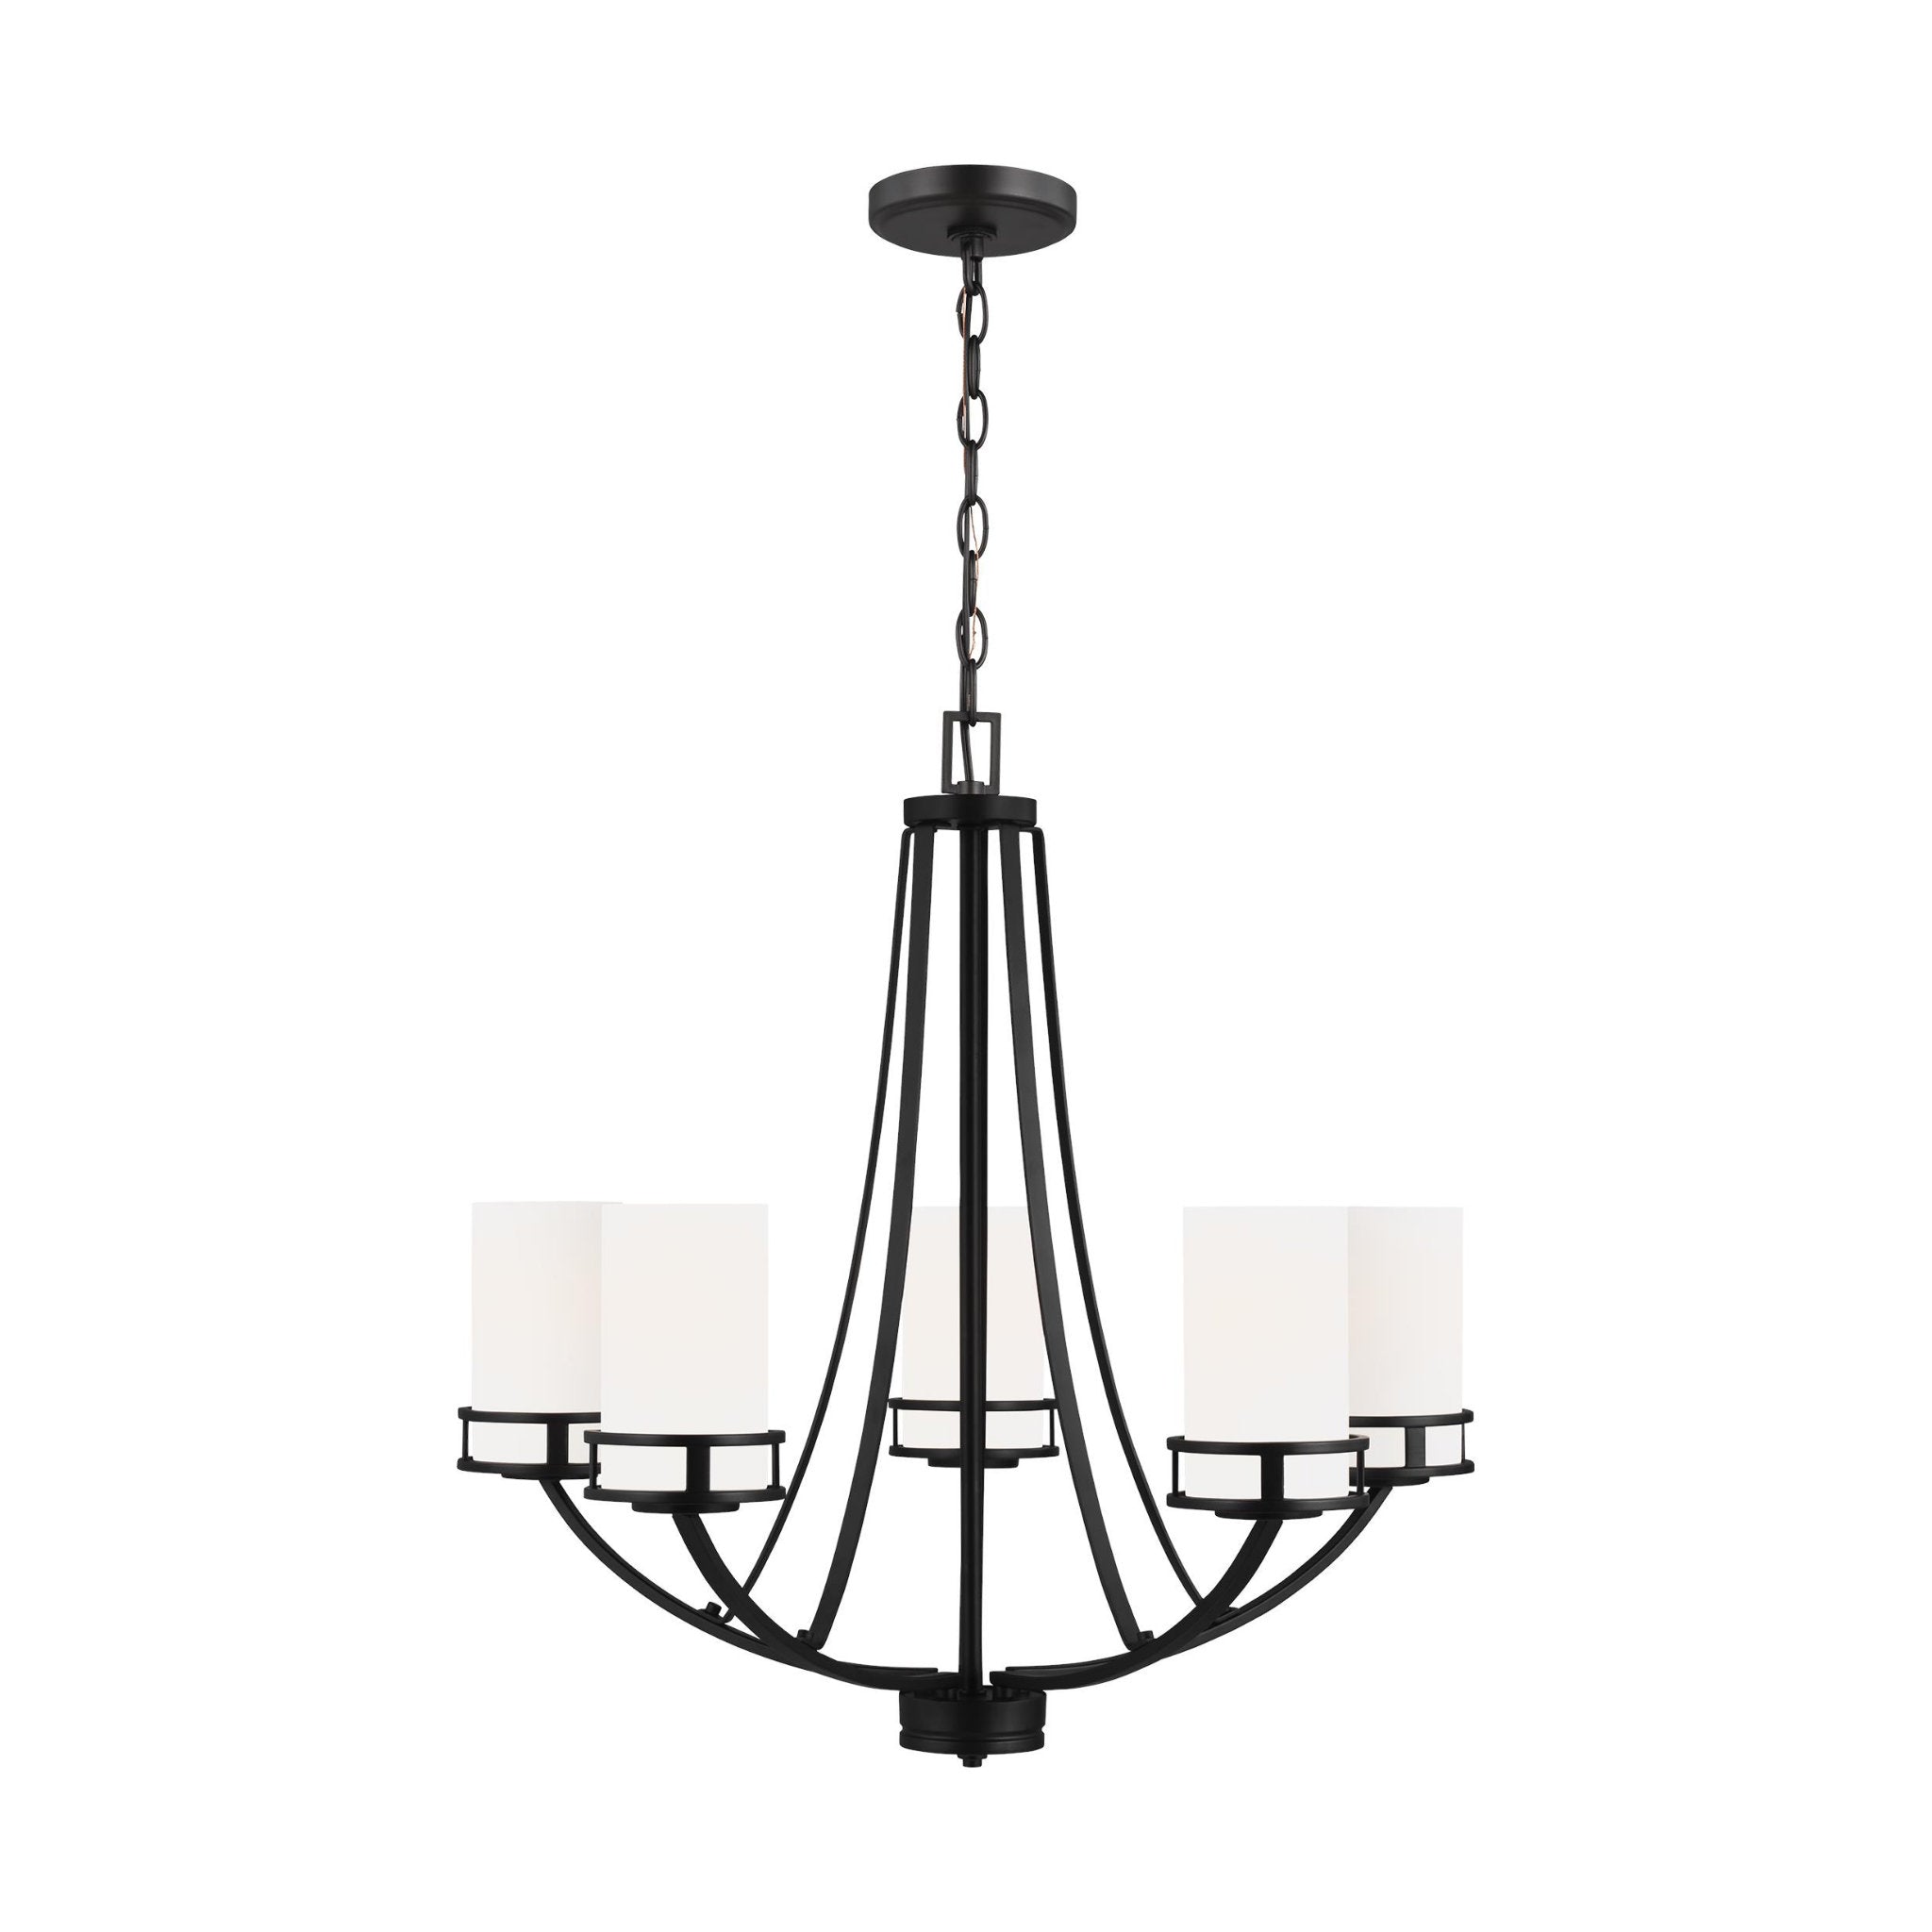 Robie Five Light Chandelier Transitional 23.375" Height Steel Round Etched / White Inside Shade in Midnight Black